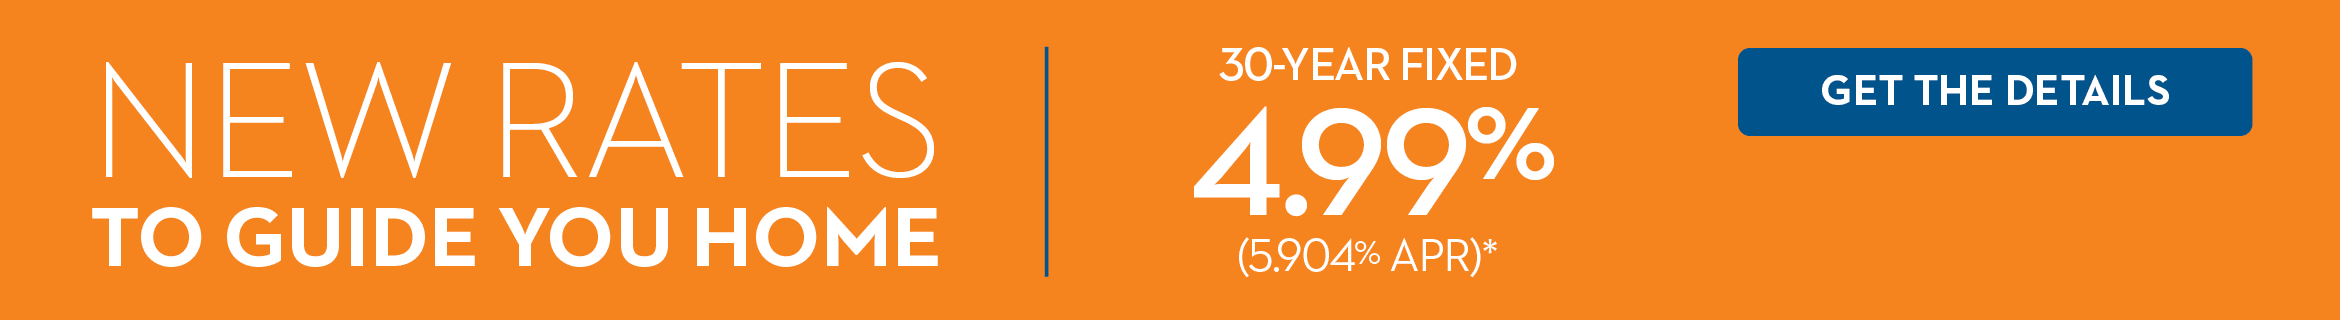 NEW RATES TO YOU HOME | 30-YEAR FIXED 4.99% (5.904% APR)* | GET THE DETAILS